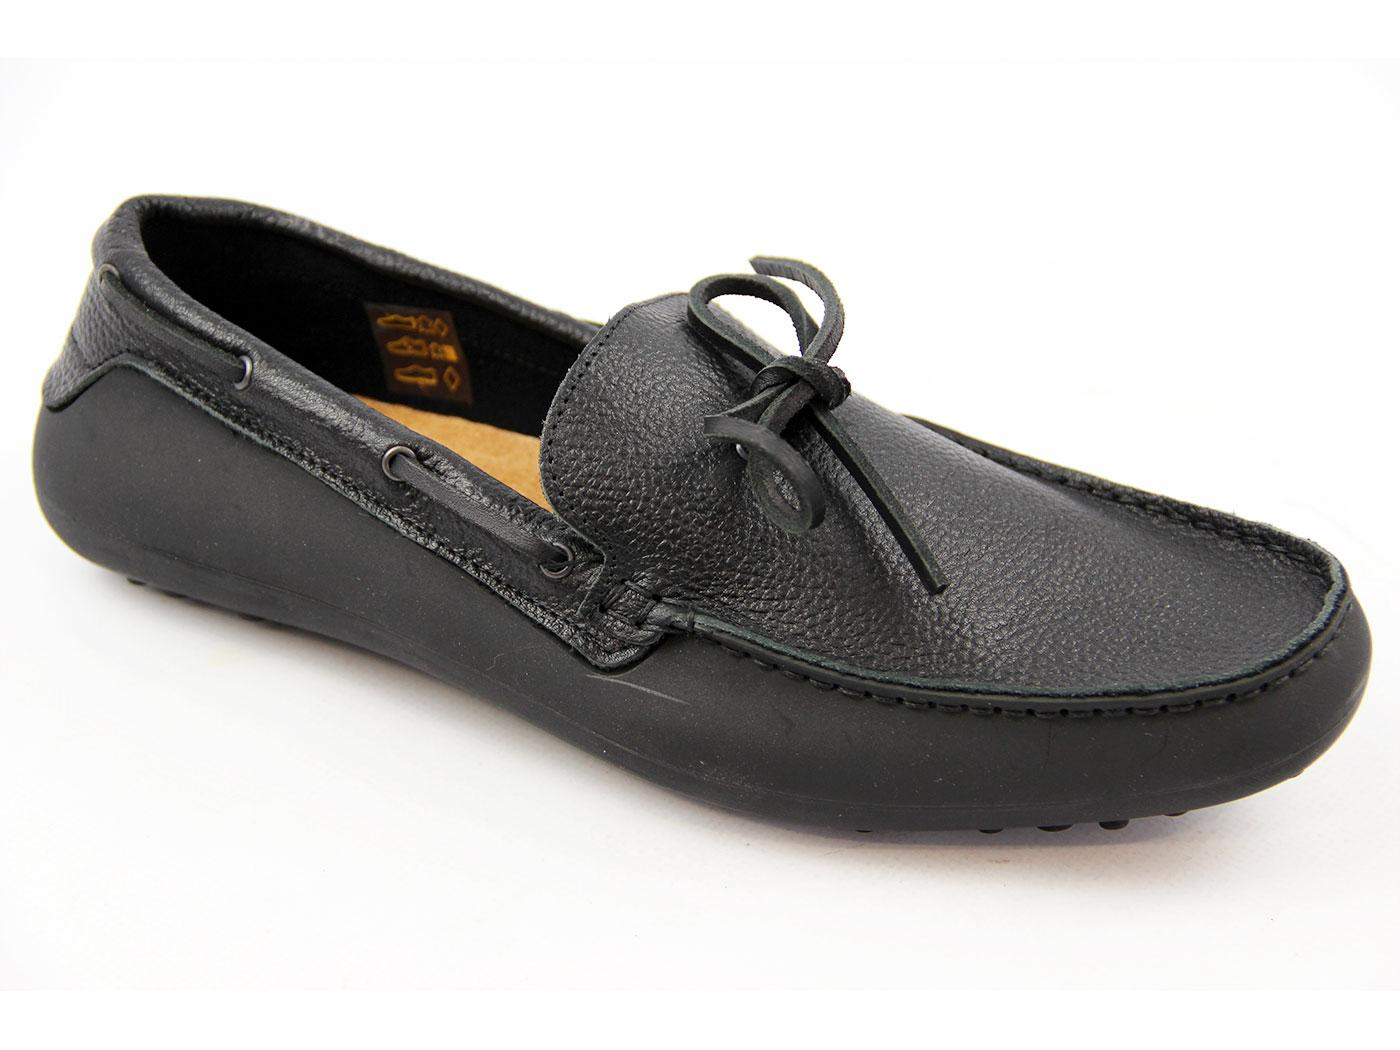 Madonie 2 H by HUDSON Retro Mod Driving Moccasins 